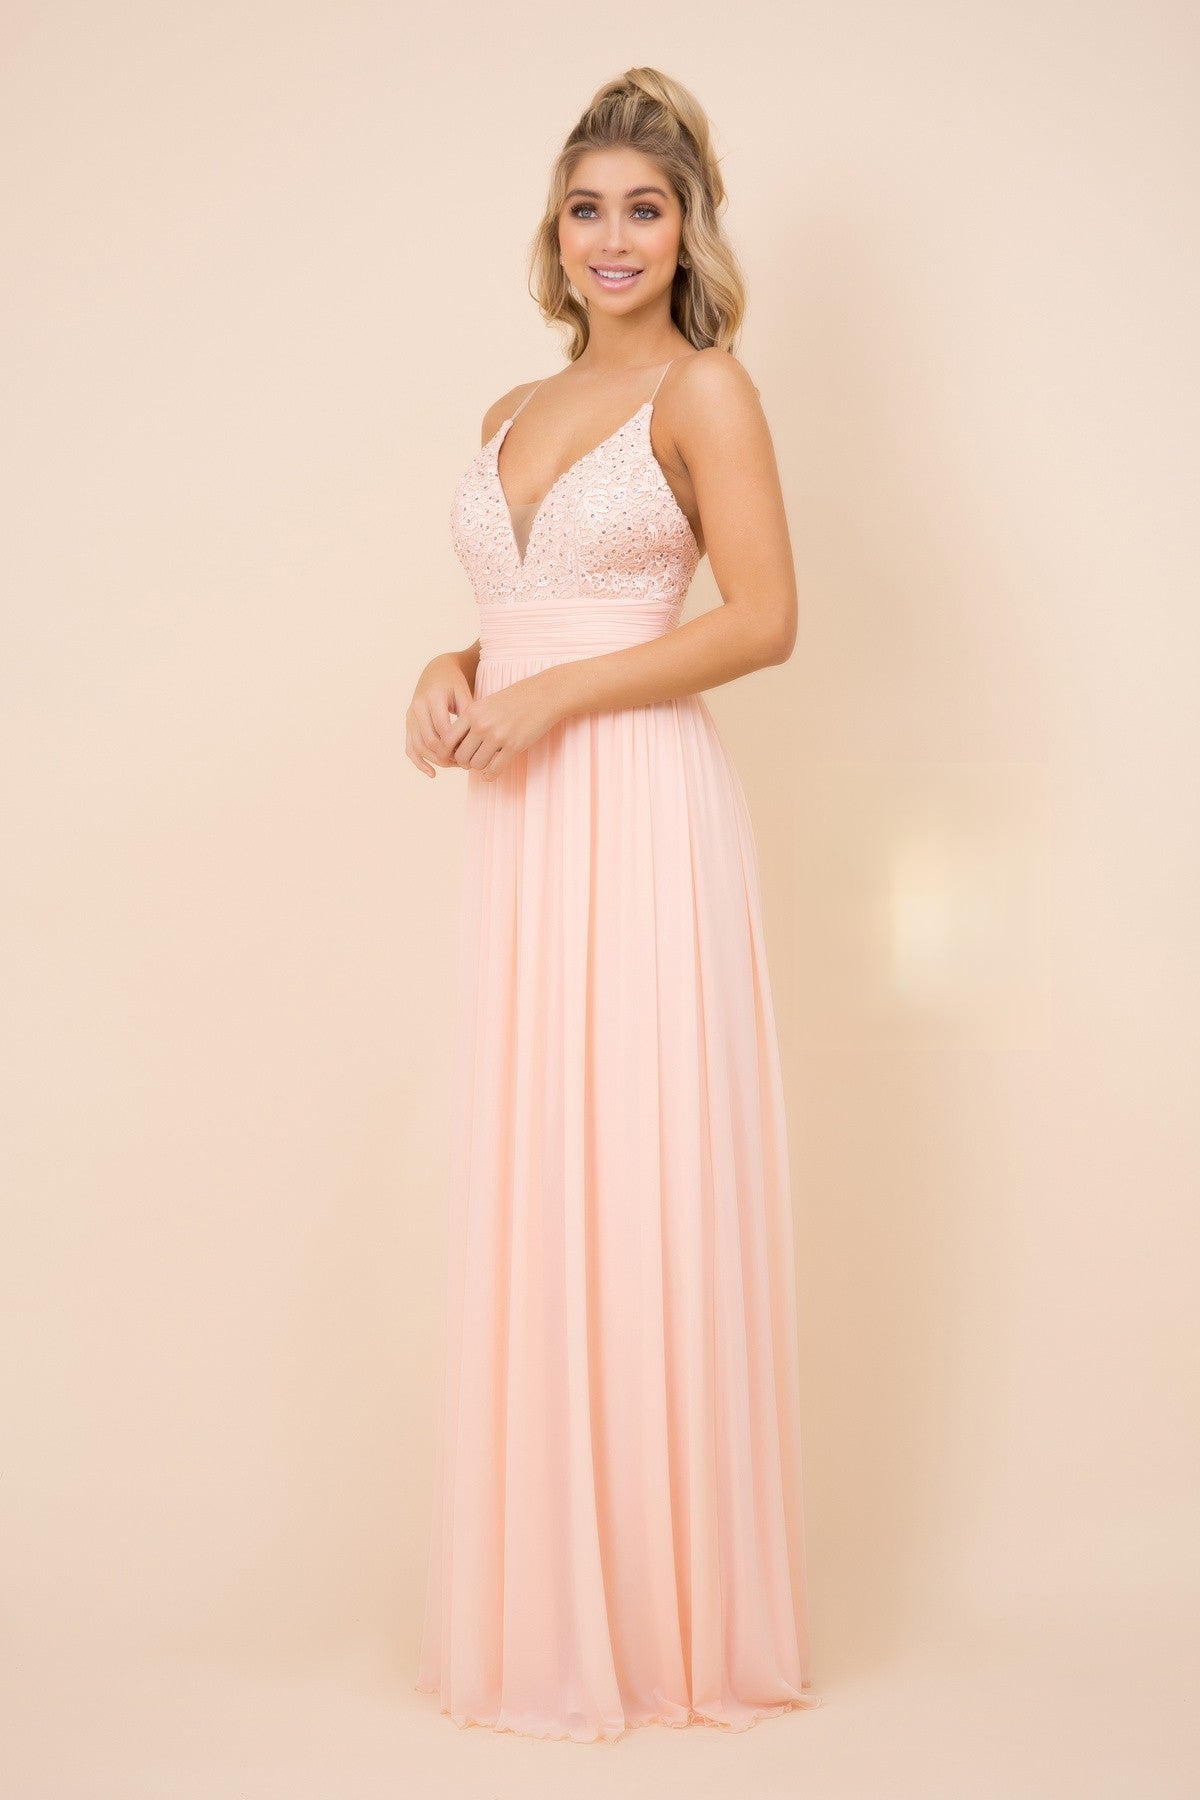 Embroidered Top Spaghetti Straps A-Line Long Bridesmaid Dress NXA070 Elsy Style Bridesmaid Dress